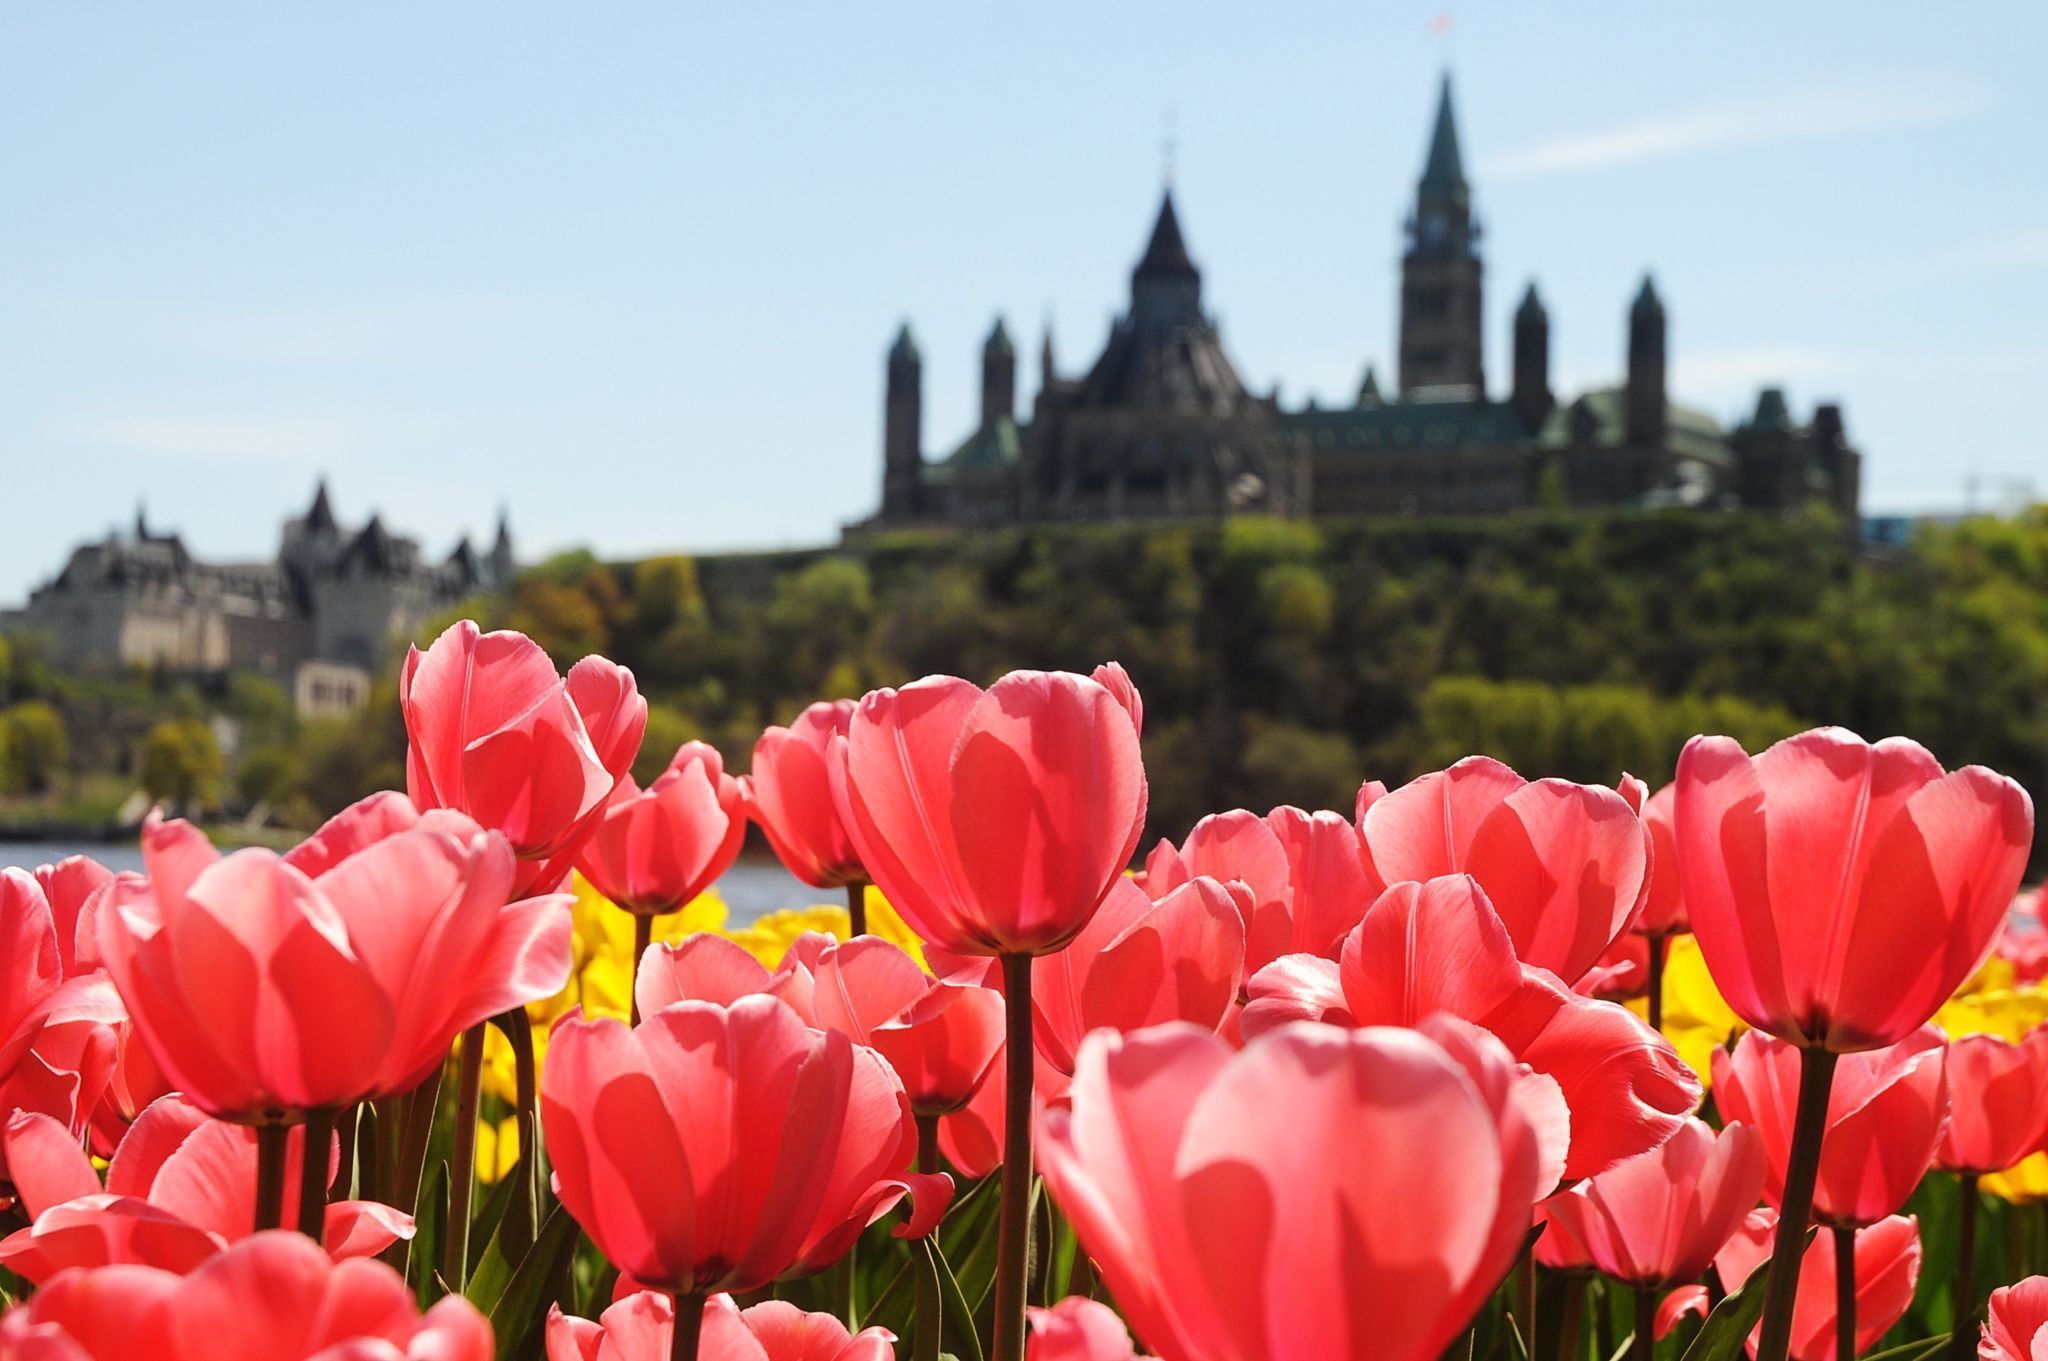 Tulips with the Parliament building in the background